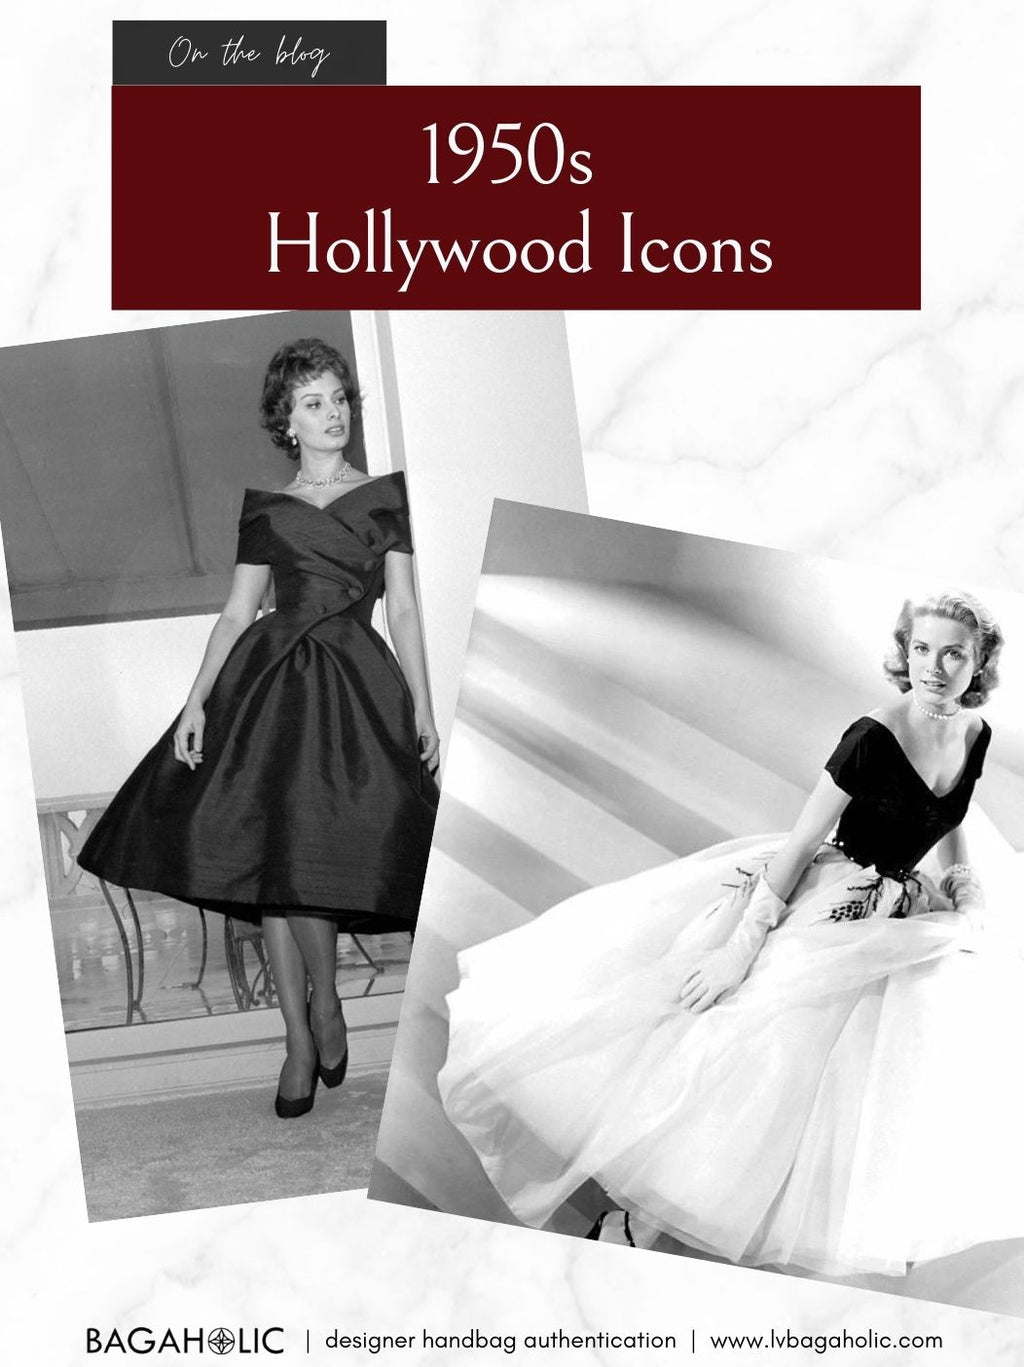 How Marilyn Monroe Influenced Fashion in the 1950s and Beyond